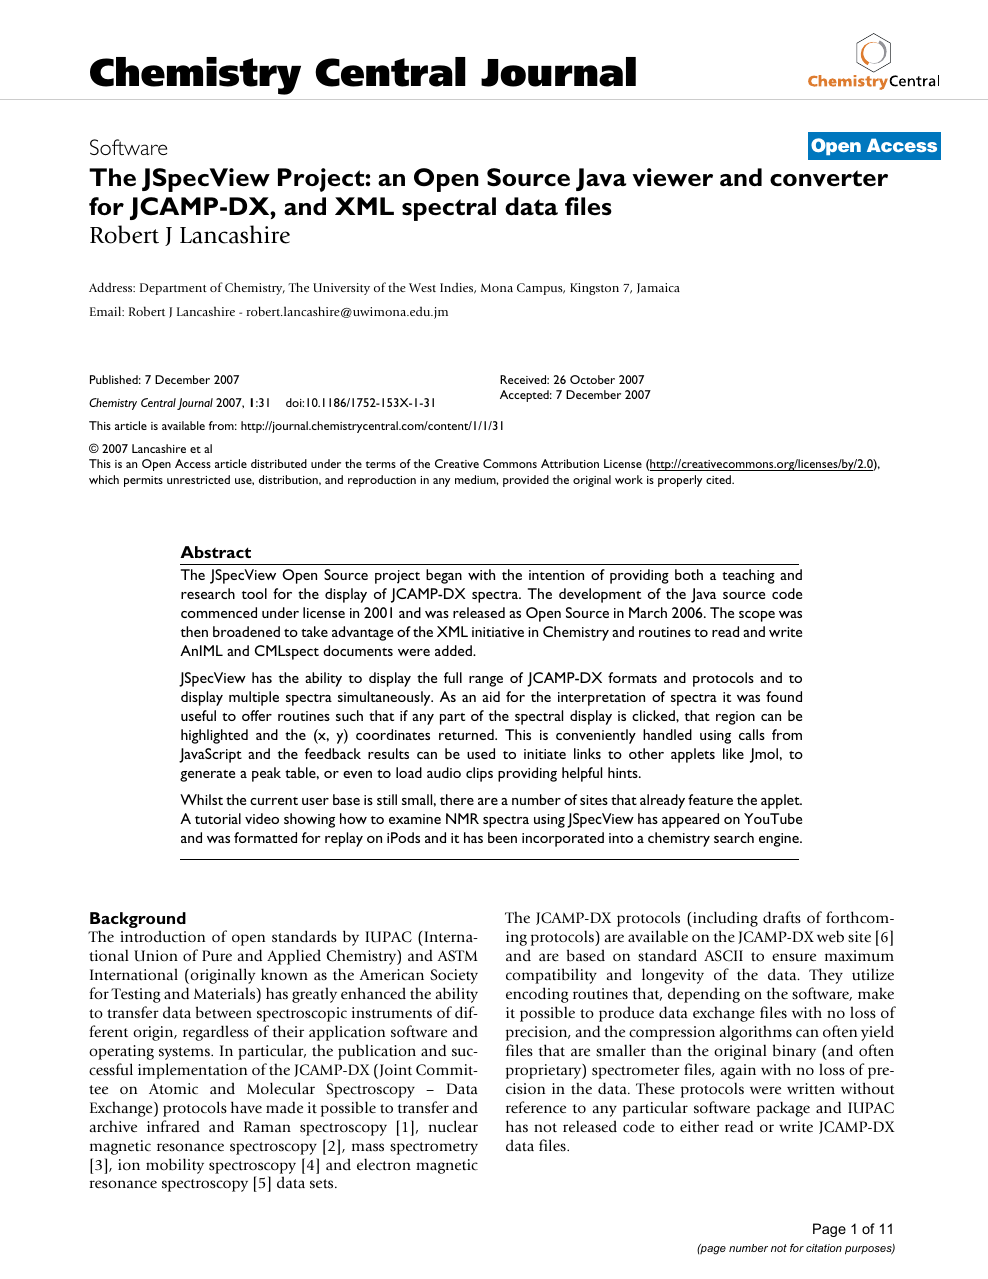 The Jspecview Project An Open Source Java Viewer And Converter For Jcamp Dx And Xml Spectral Data Files Topic Of Research Paper In Biological Sciences Download Scholarly Article Pdf And Read For